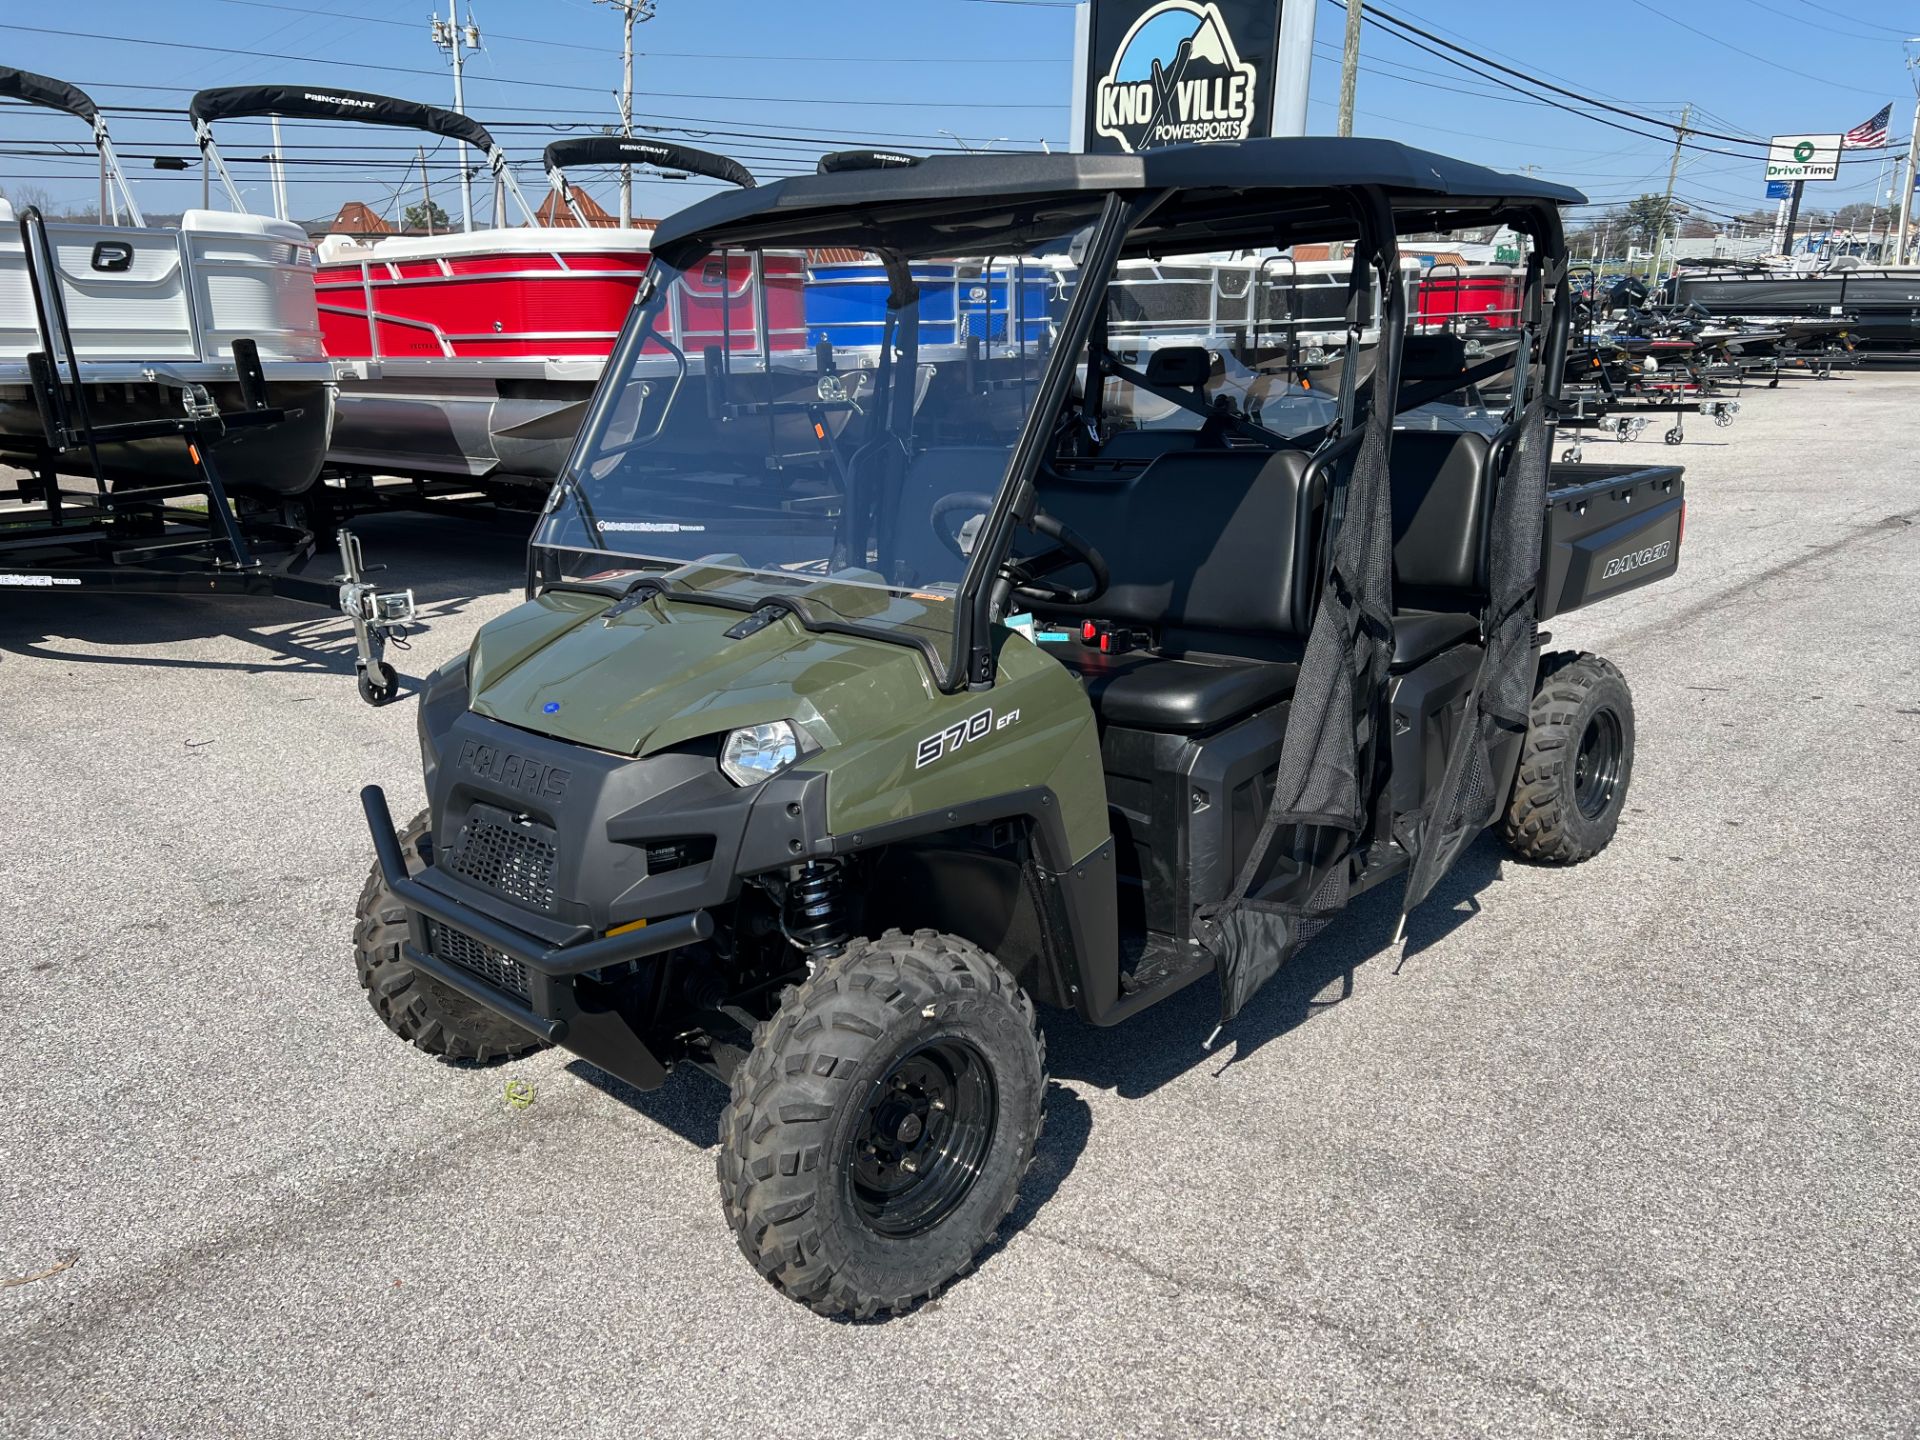 2024 Polaris Ranger Crew 570 Full-Size in Knoxville, Tennessee - Photo 1